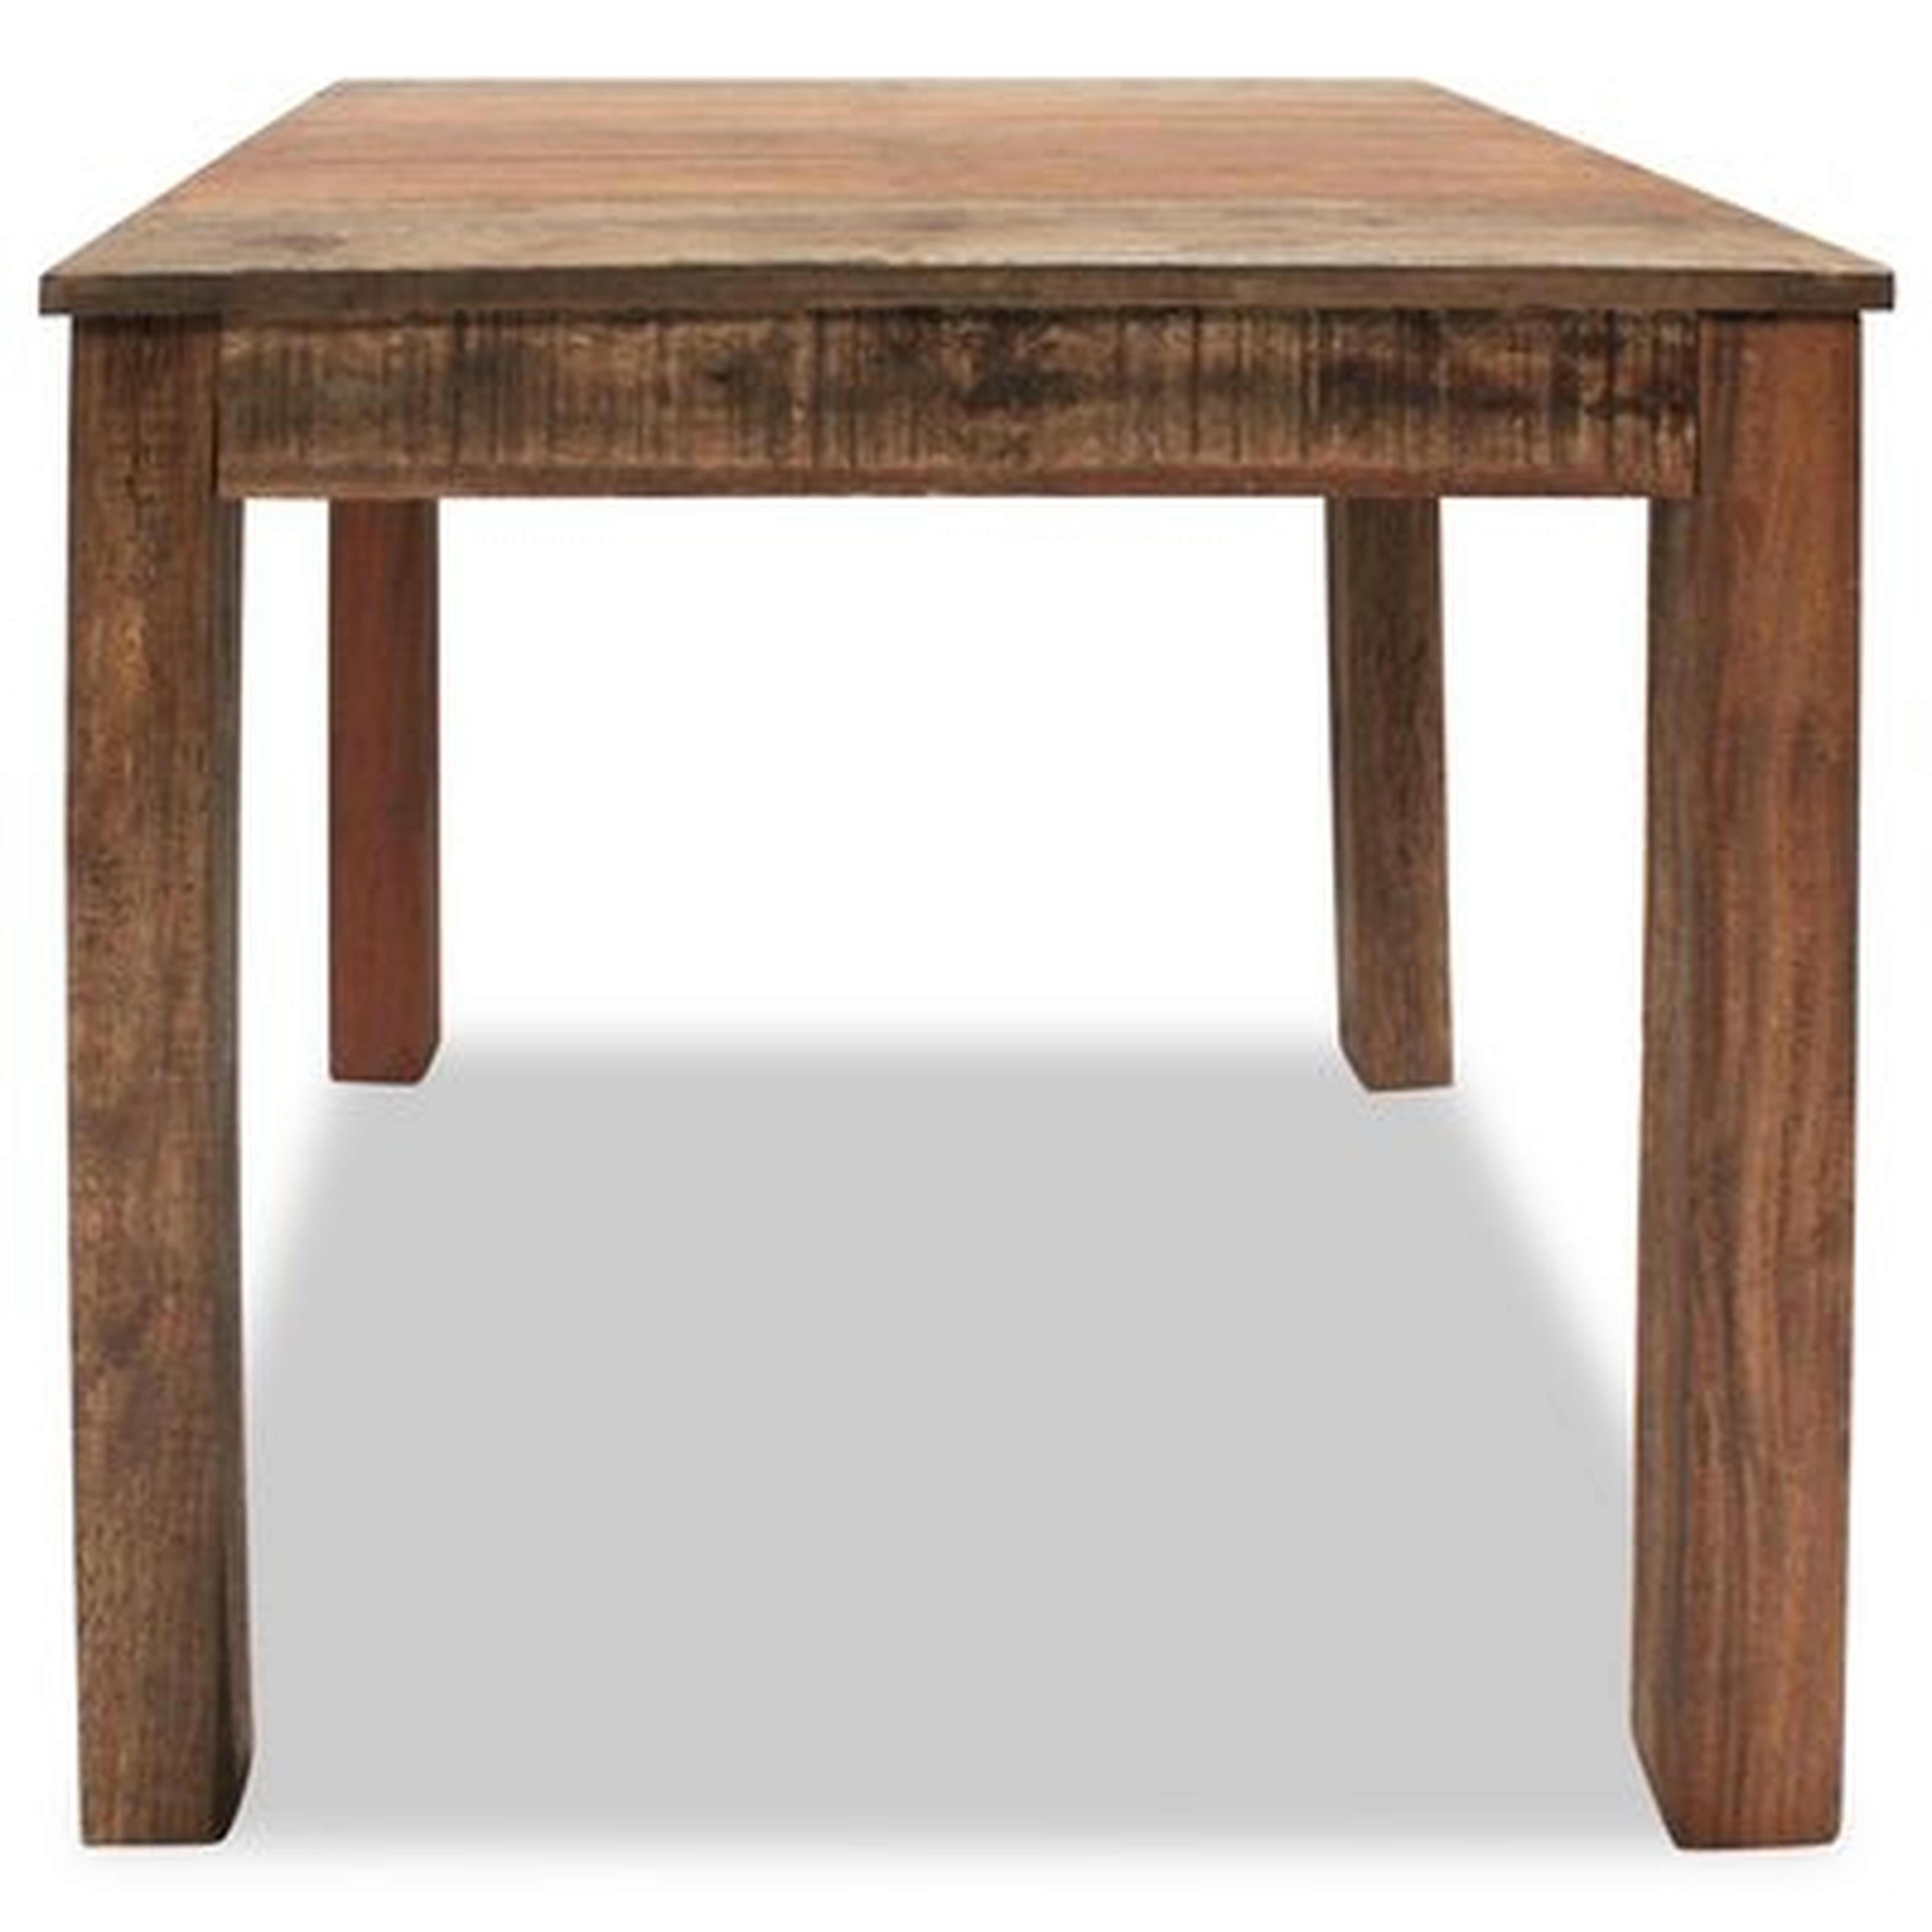 Bagneux Solid Wood Dining Table - Wayfair